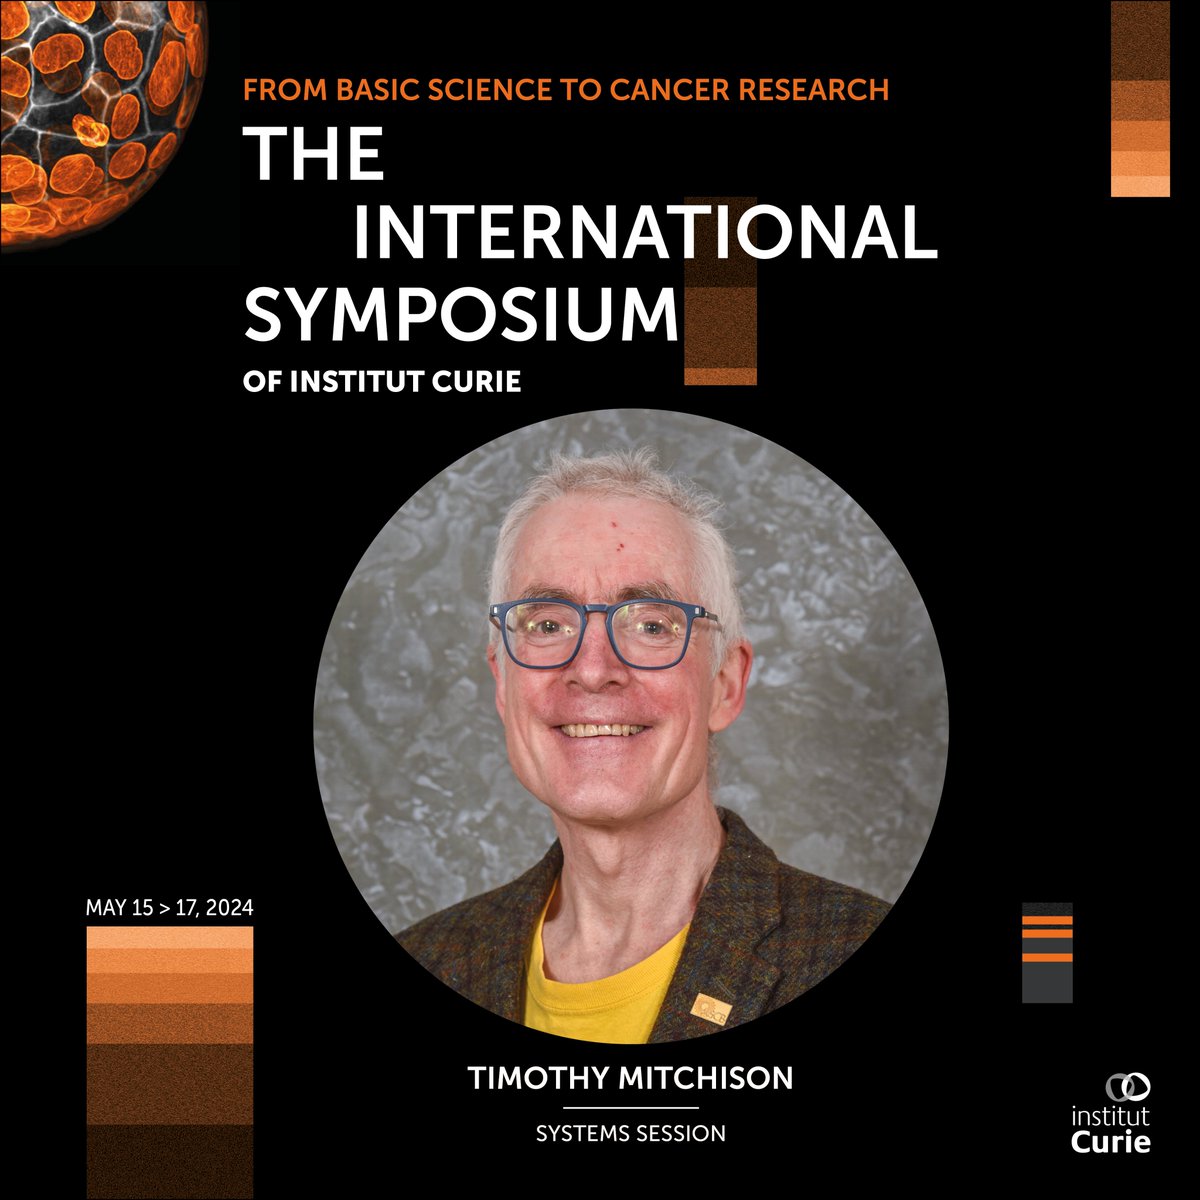 Have you ever wondered how do Microtubule Drugs act as Medicines? Grab your chance to get insights from the expert, Dr. Mitchison, co-dir. of the Initiative in Systems Pharmacology at @harvardmed, at the 1st International Symposium of @institut_curie. ⏩ curiesymposium.fr